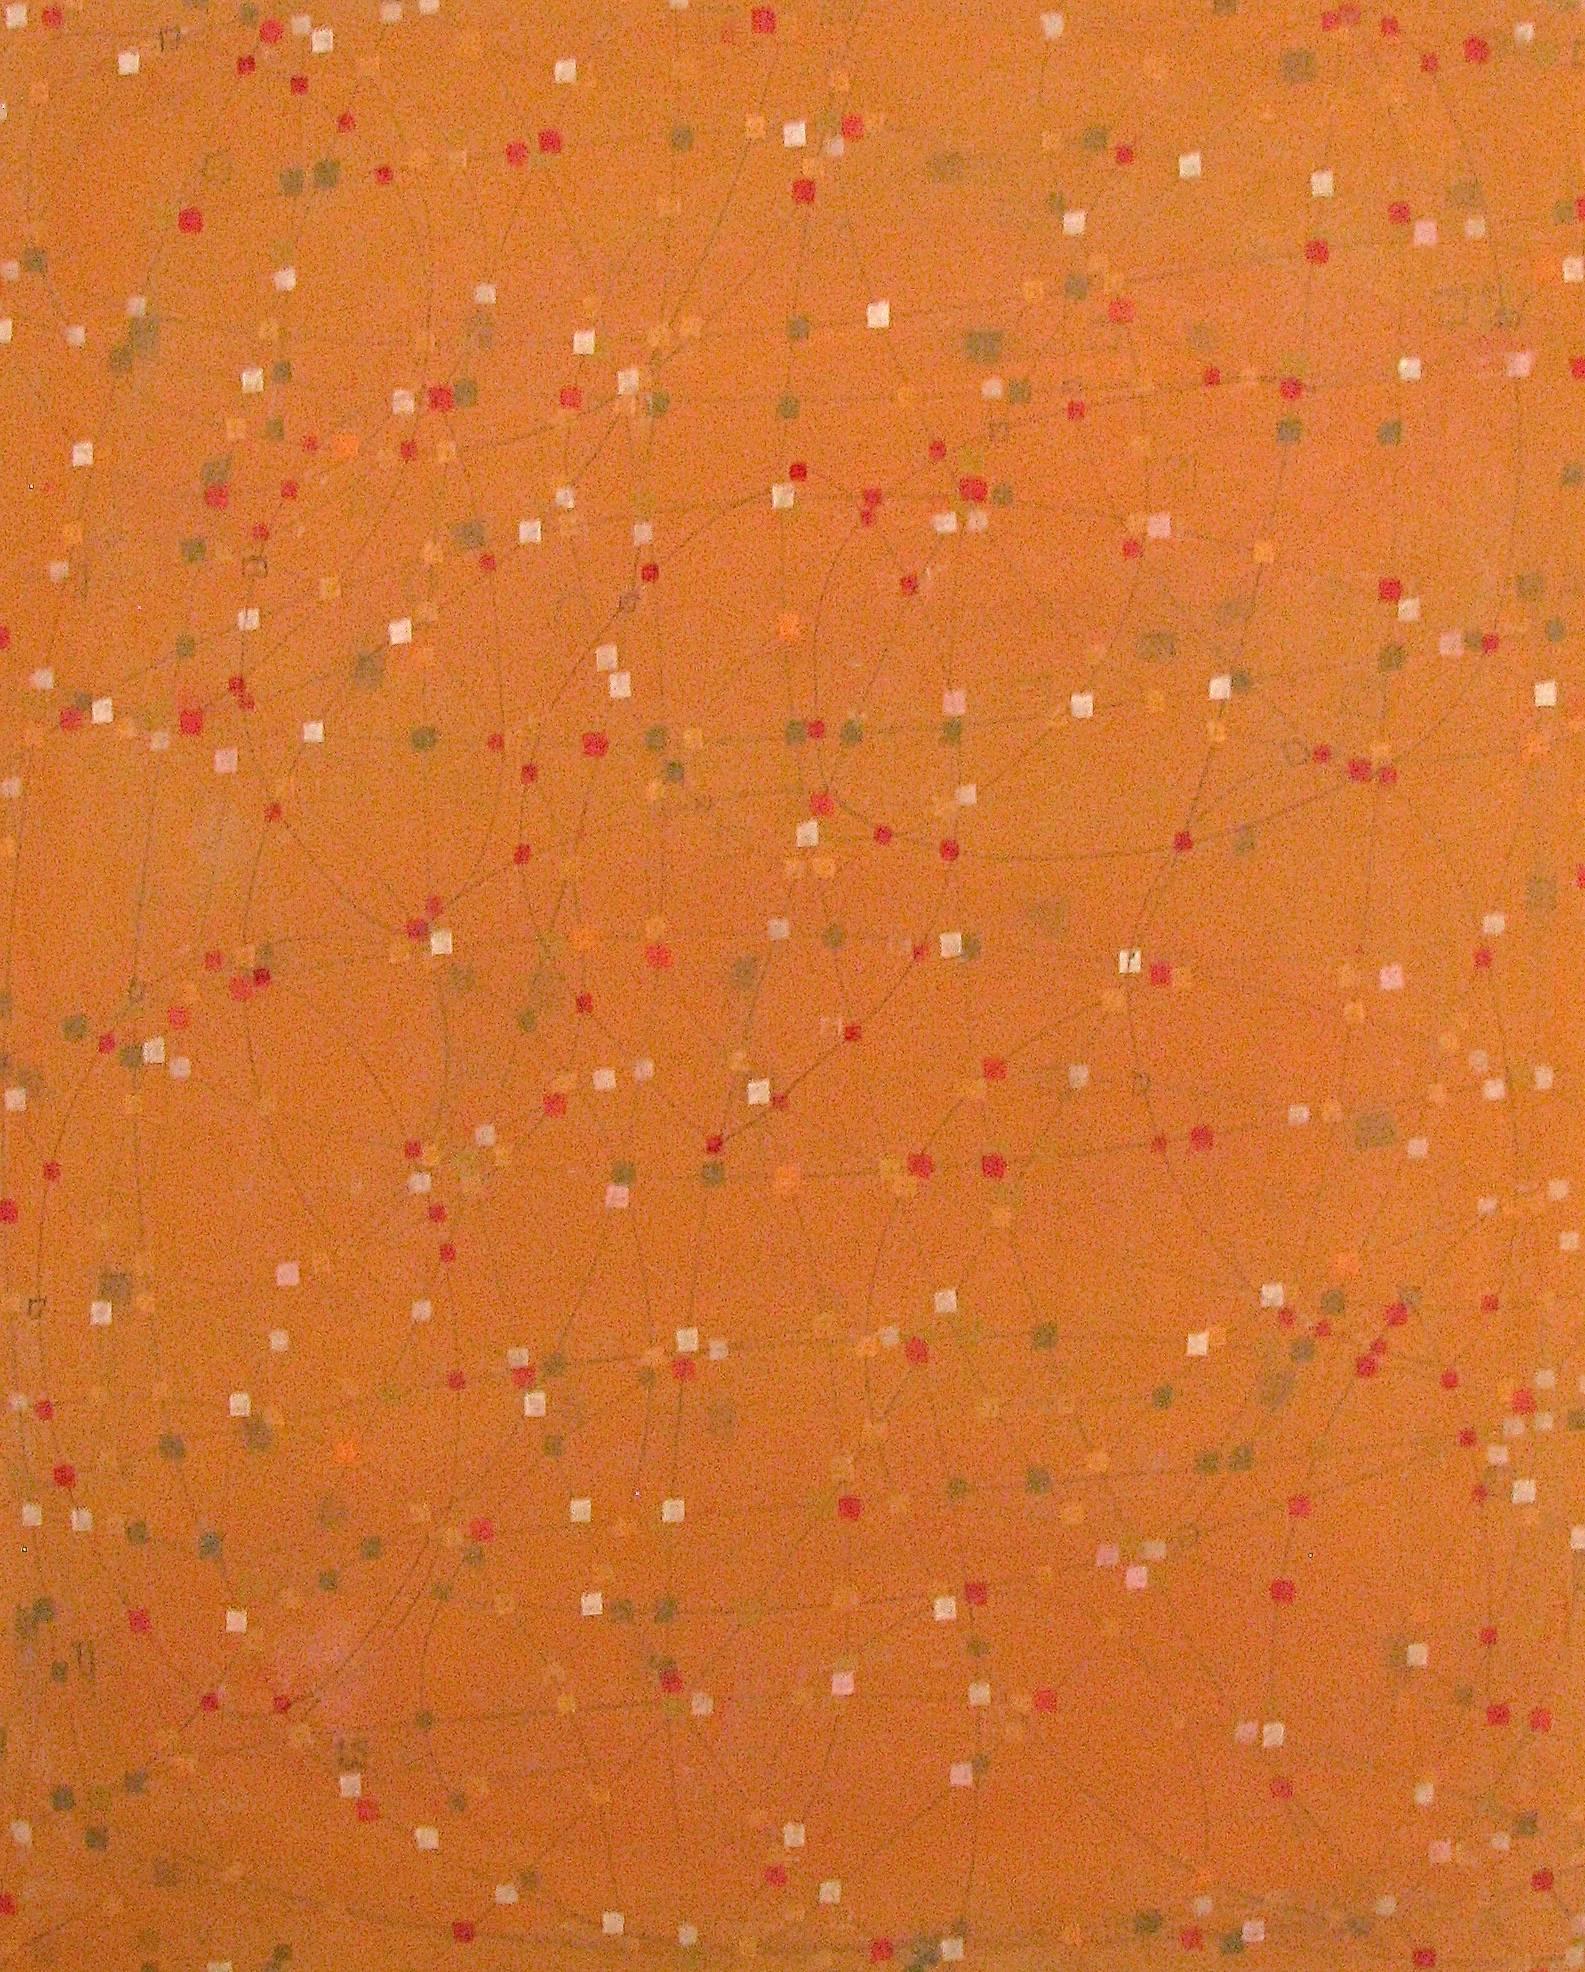 "Notations Q" Abstract Expressionist Playful Orange Bright Colorful Mixed Media